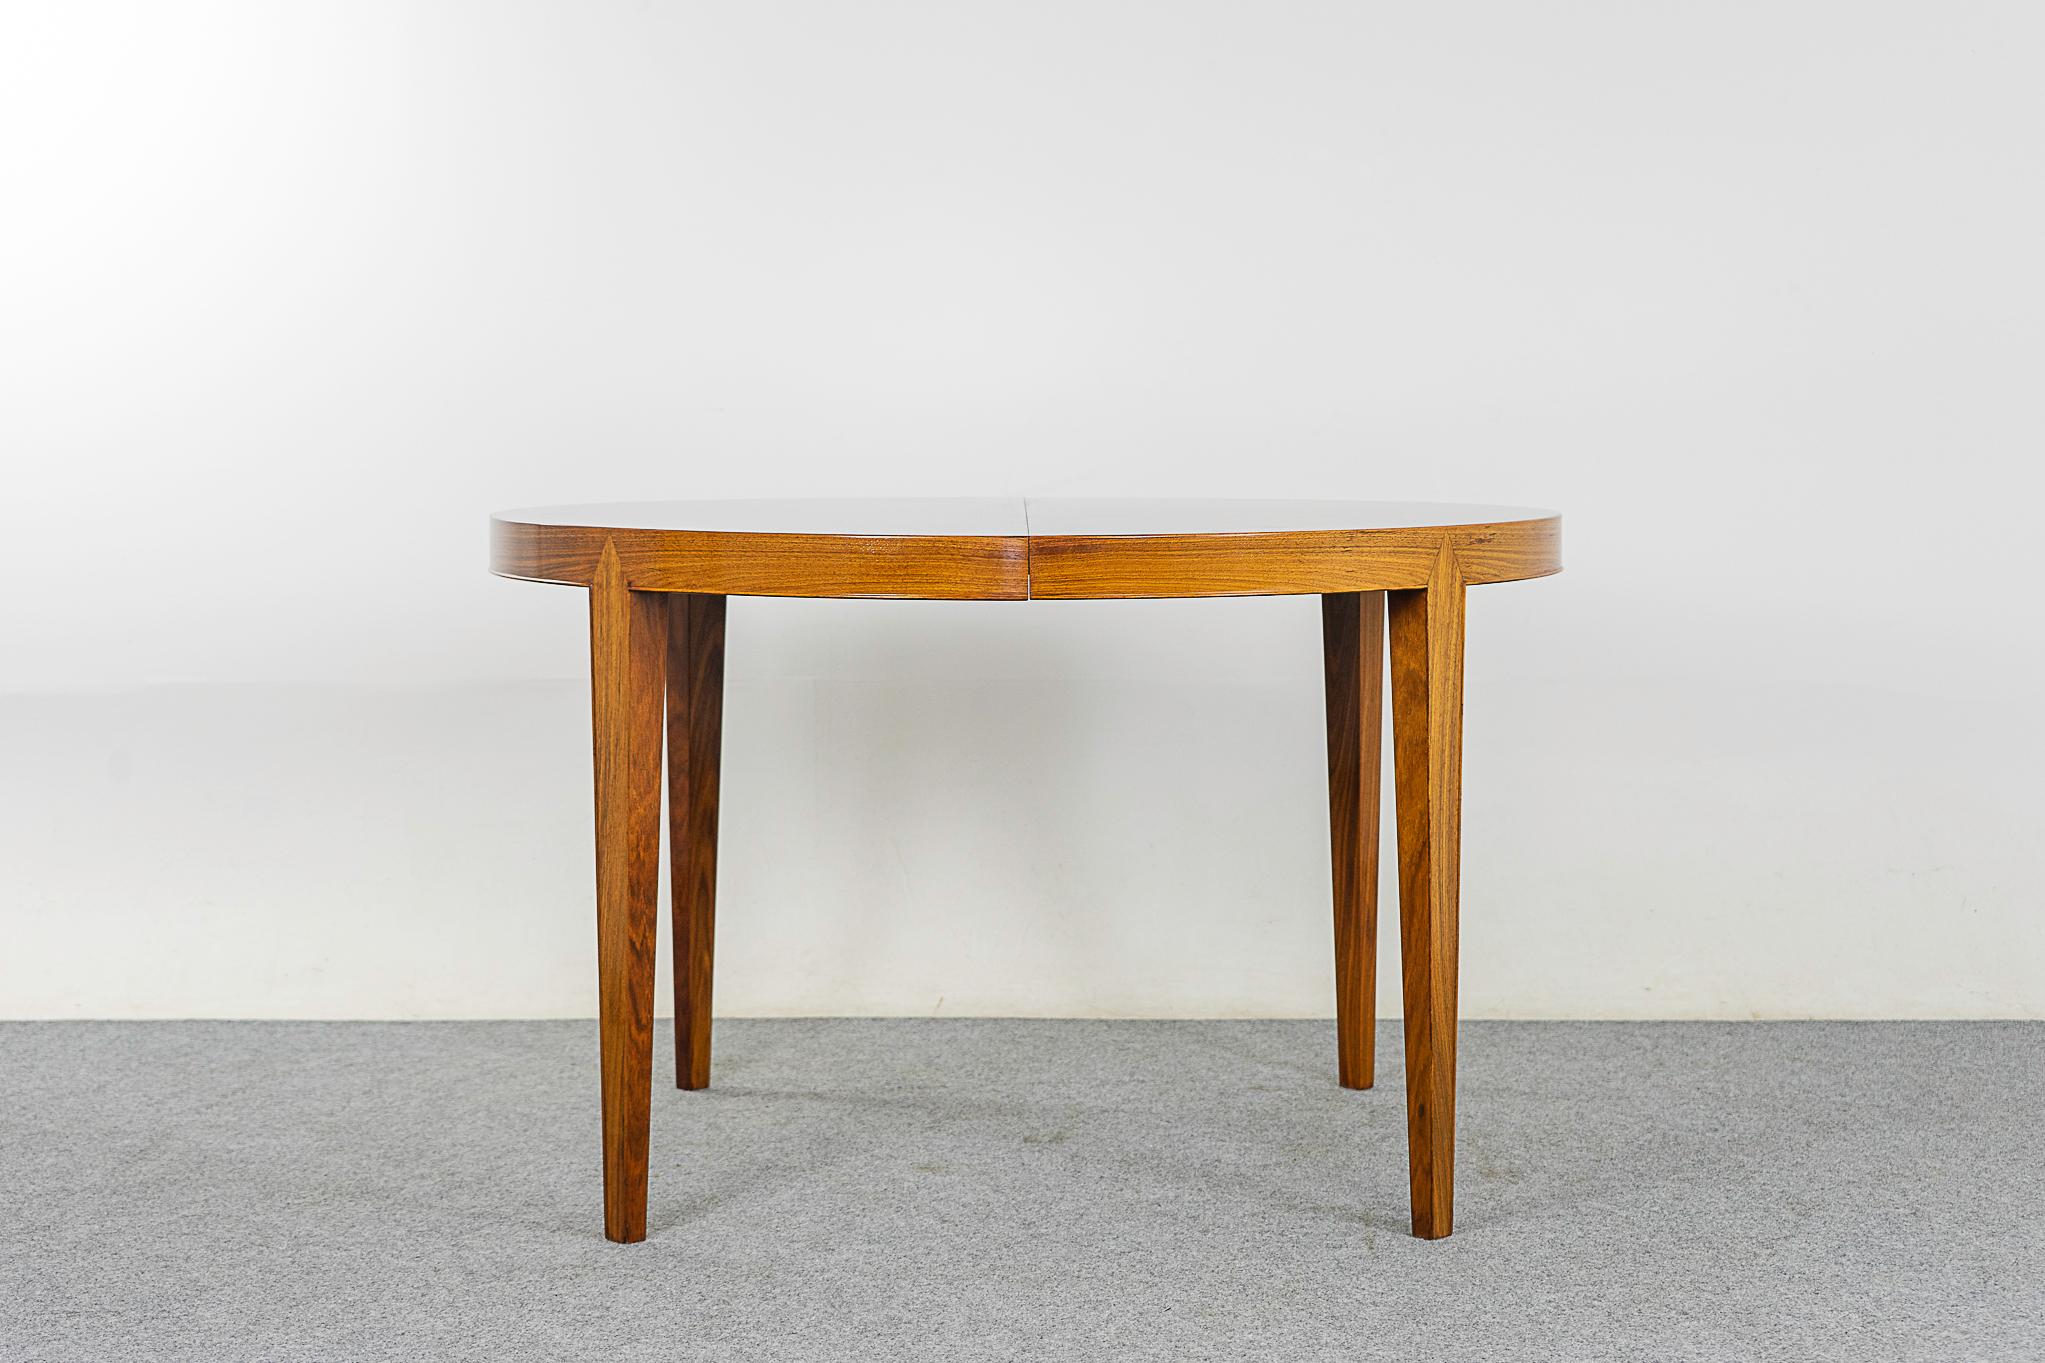 Rosewood Danish dining table by Haslev, circa 1960's. Expandable circular design, the perfect table for modern compact living spaces. Use one leaf or more depending on your needs. Metal leg swings down for extra support when second leaf is in use.